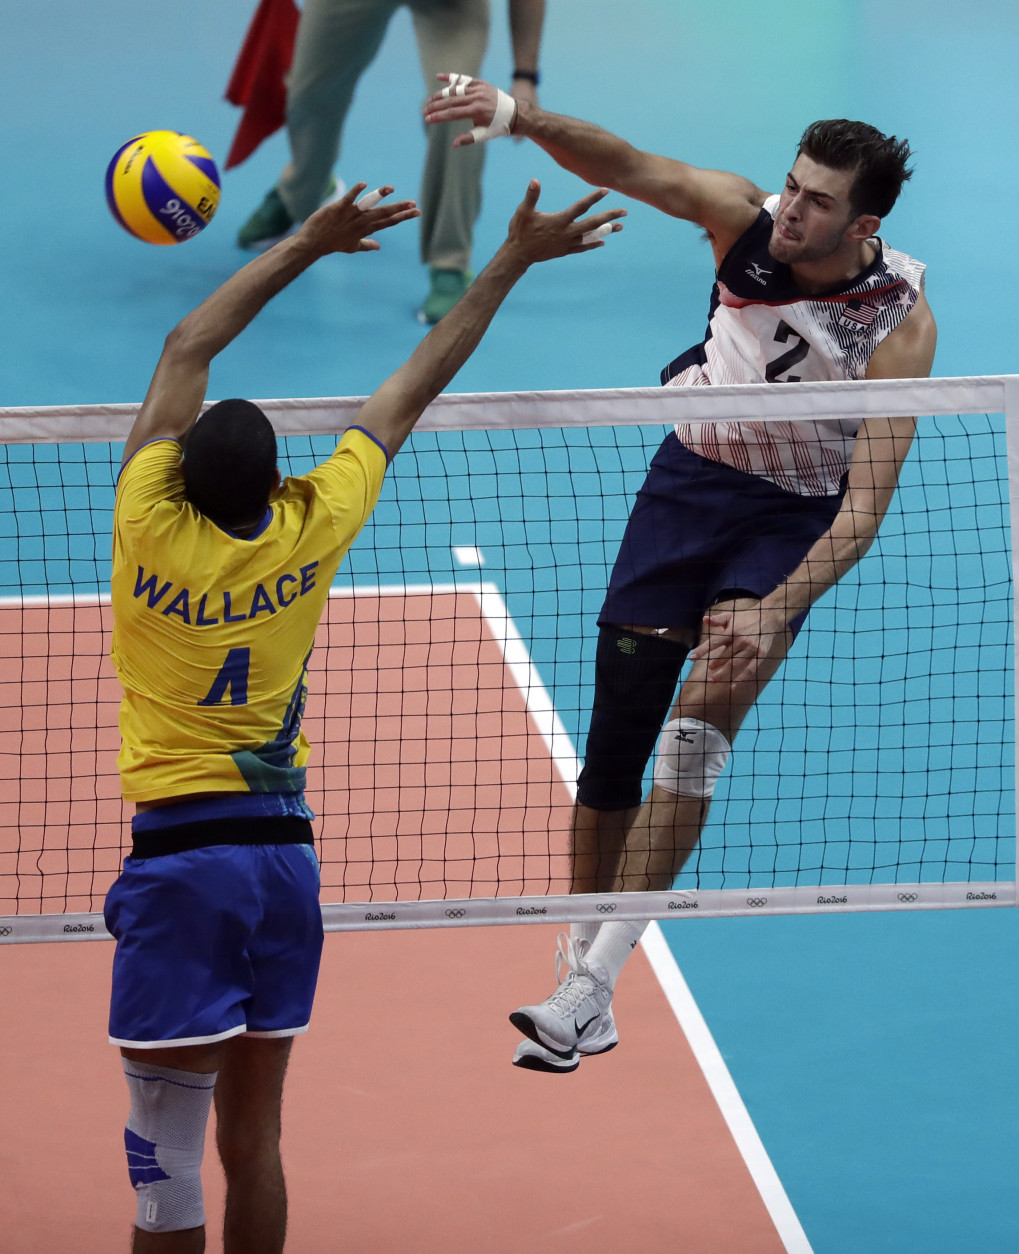 United States' Aaron Russell, right, spikes the ball over Brazil's Wallace de Souza during a men's preliminary volleyball match at the 2016 Summer Olympics in Rio de Janeiro, Brazil, Thursday, Aug. 11, 2016. (AP Photo/Jeff Roberson)